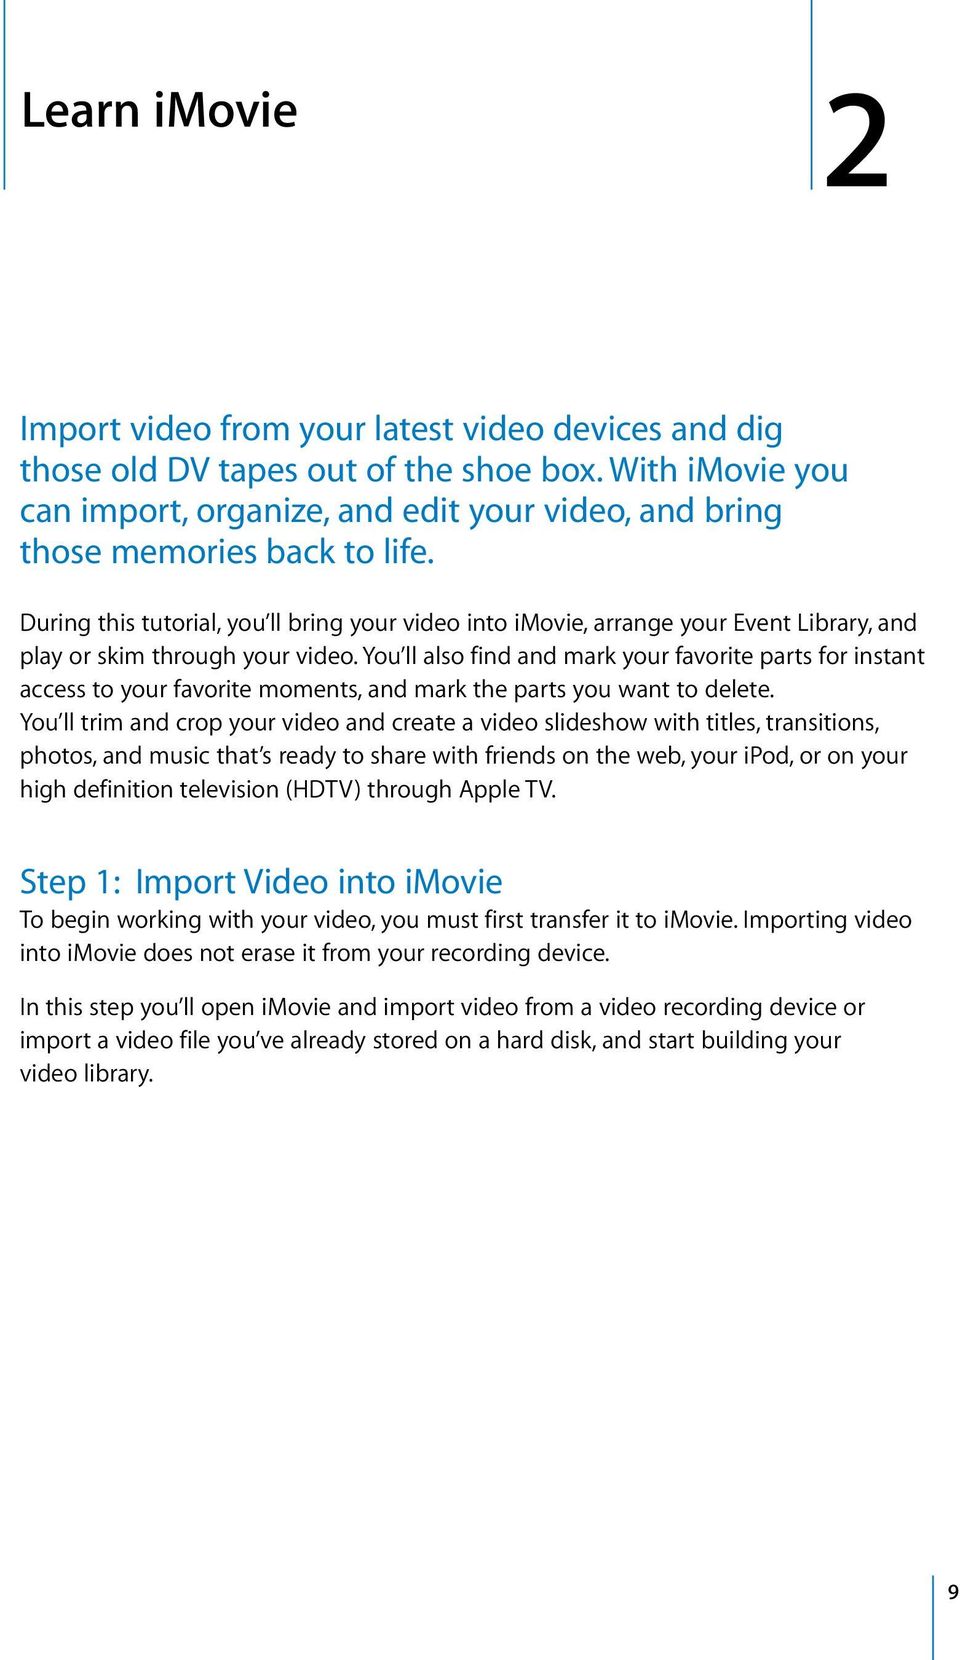 During this tutorial, you ll bring your video into imovie, arrange your Event Library, and play or skim through your video.